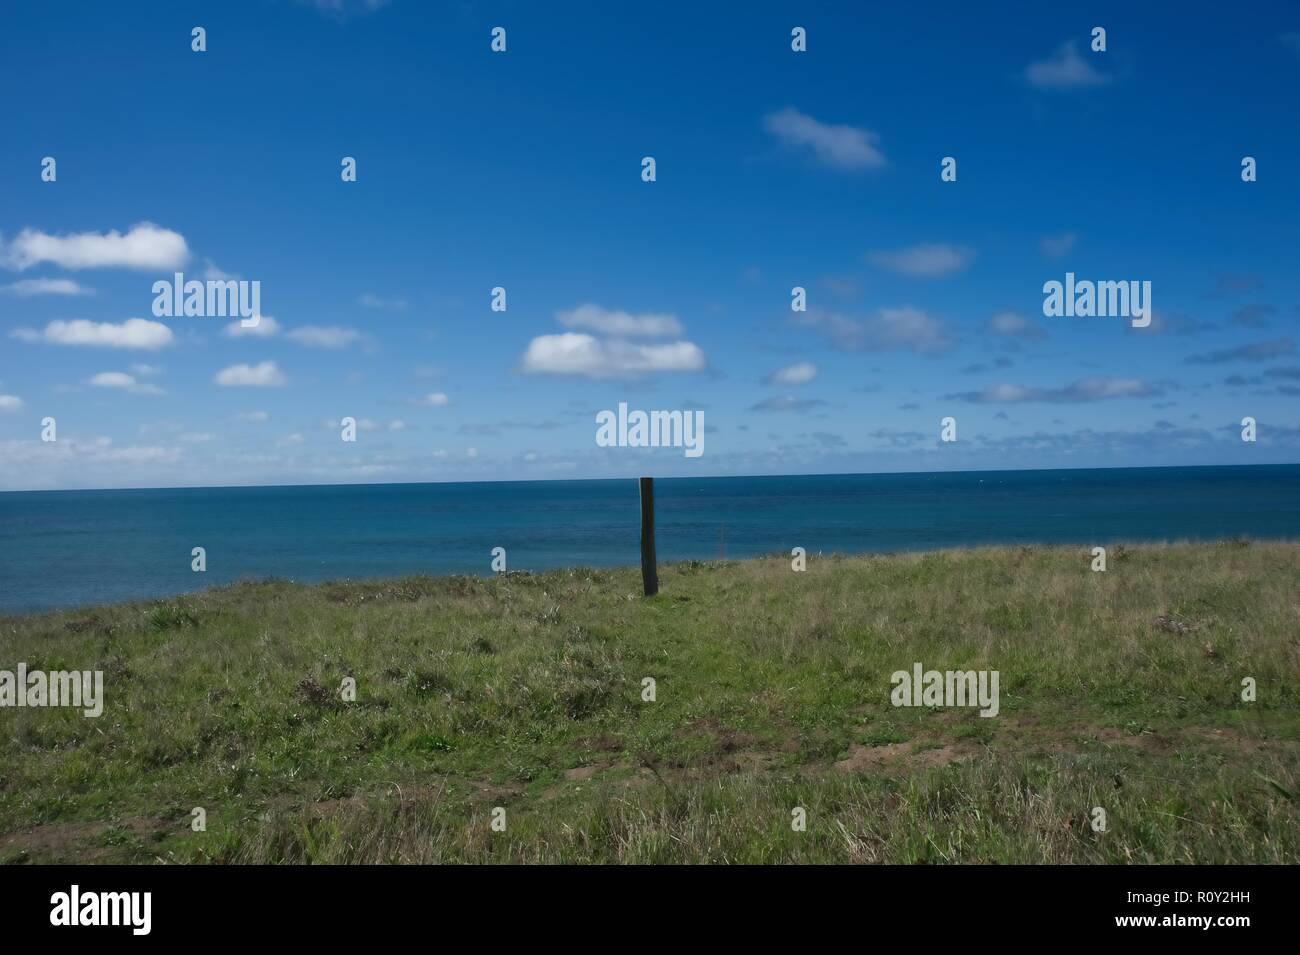 Pacific Ocean view with a post in the view from the grassy overlook on a clear day with some puffy clouds Stock Photo